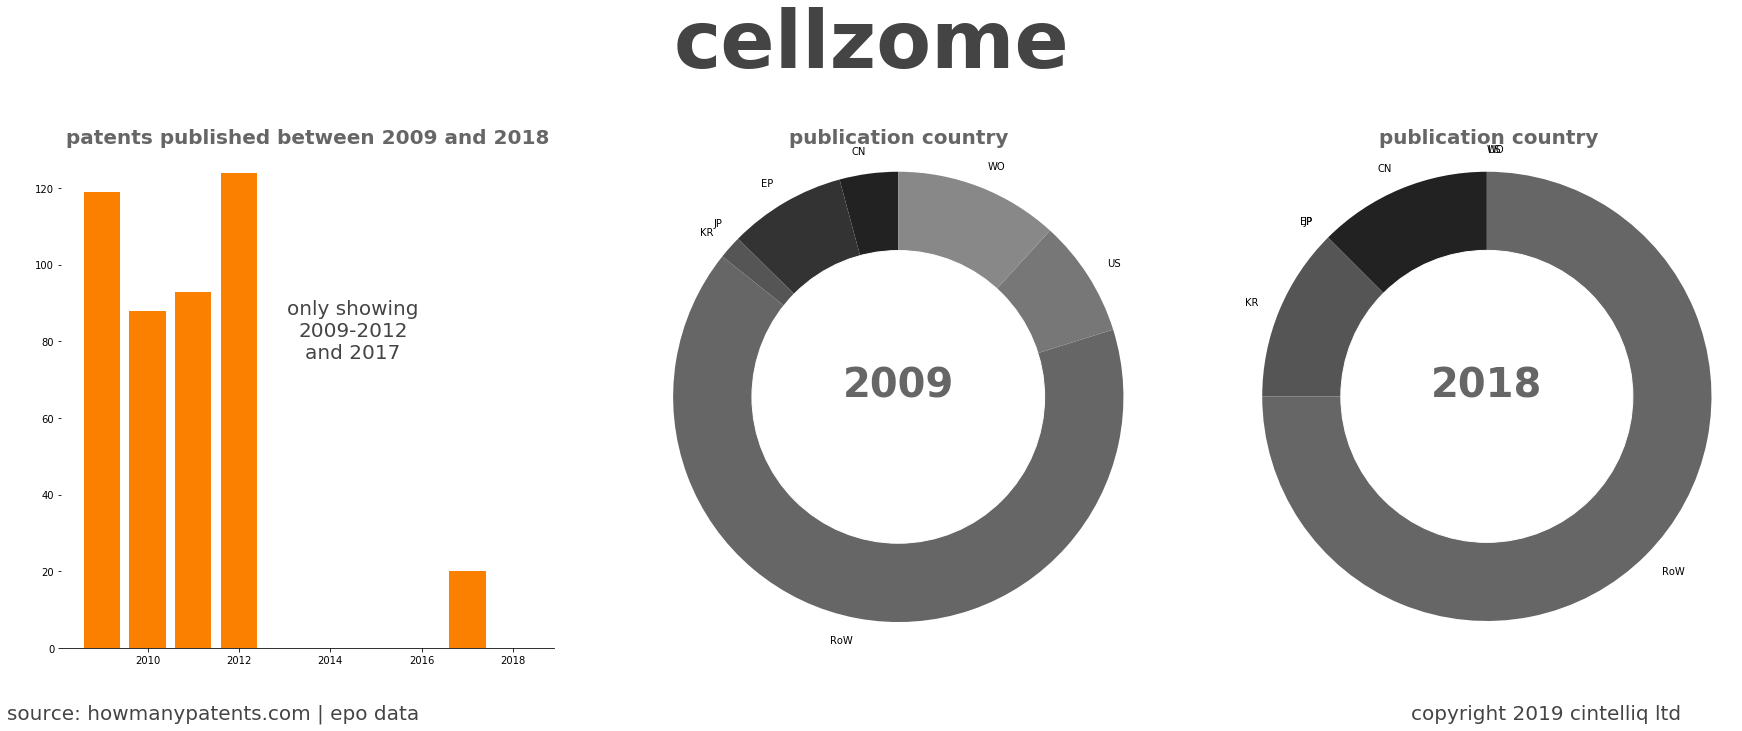 summary of patents for Cellzome